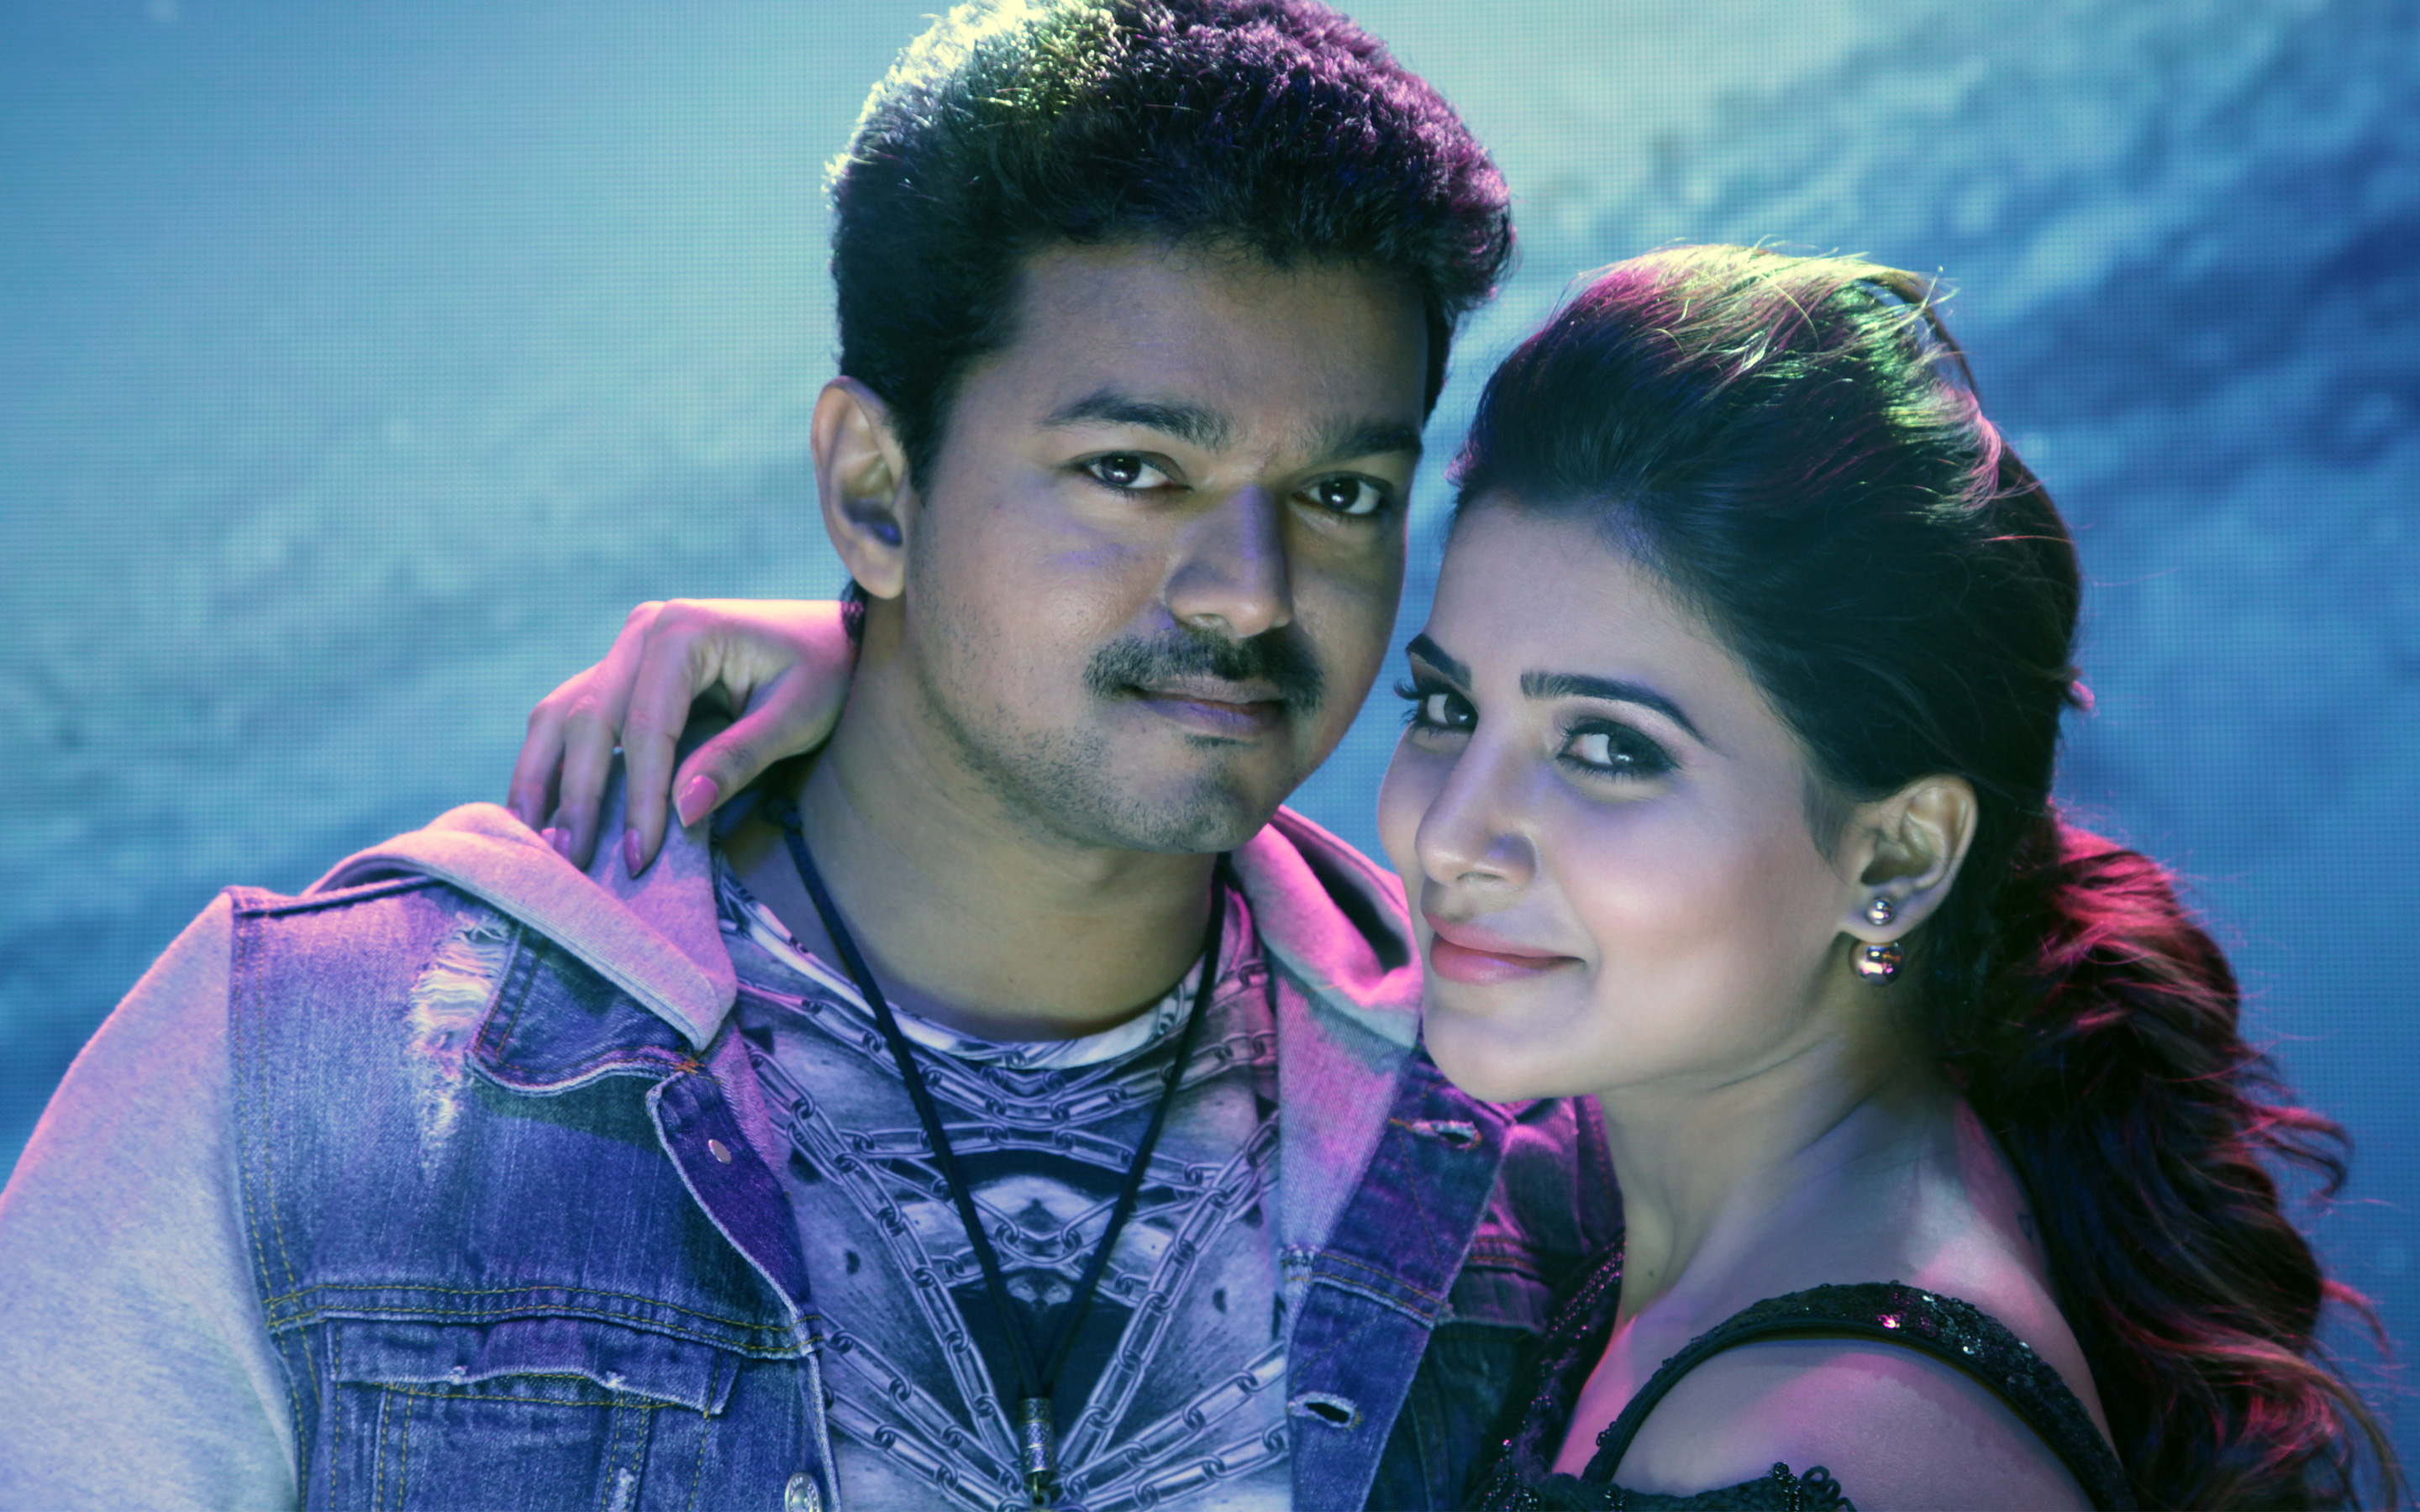 Vijay 4K wallpaper for your desktop or mobile screen free and easy to download